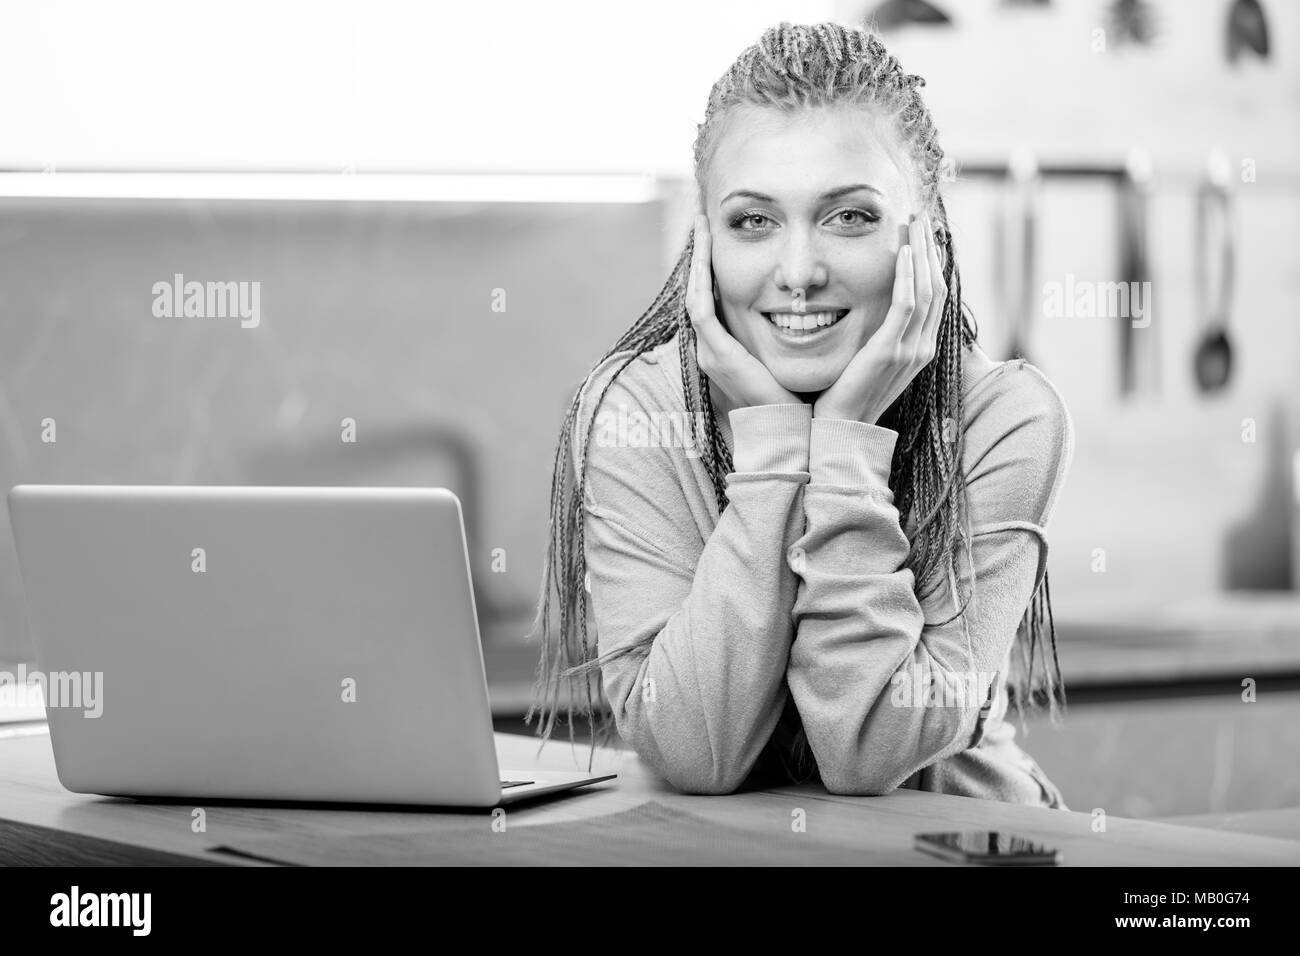 Young cheerful long-haired woman with box braids sitting next to laptop Stock Photo